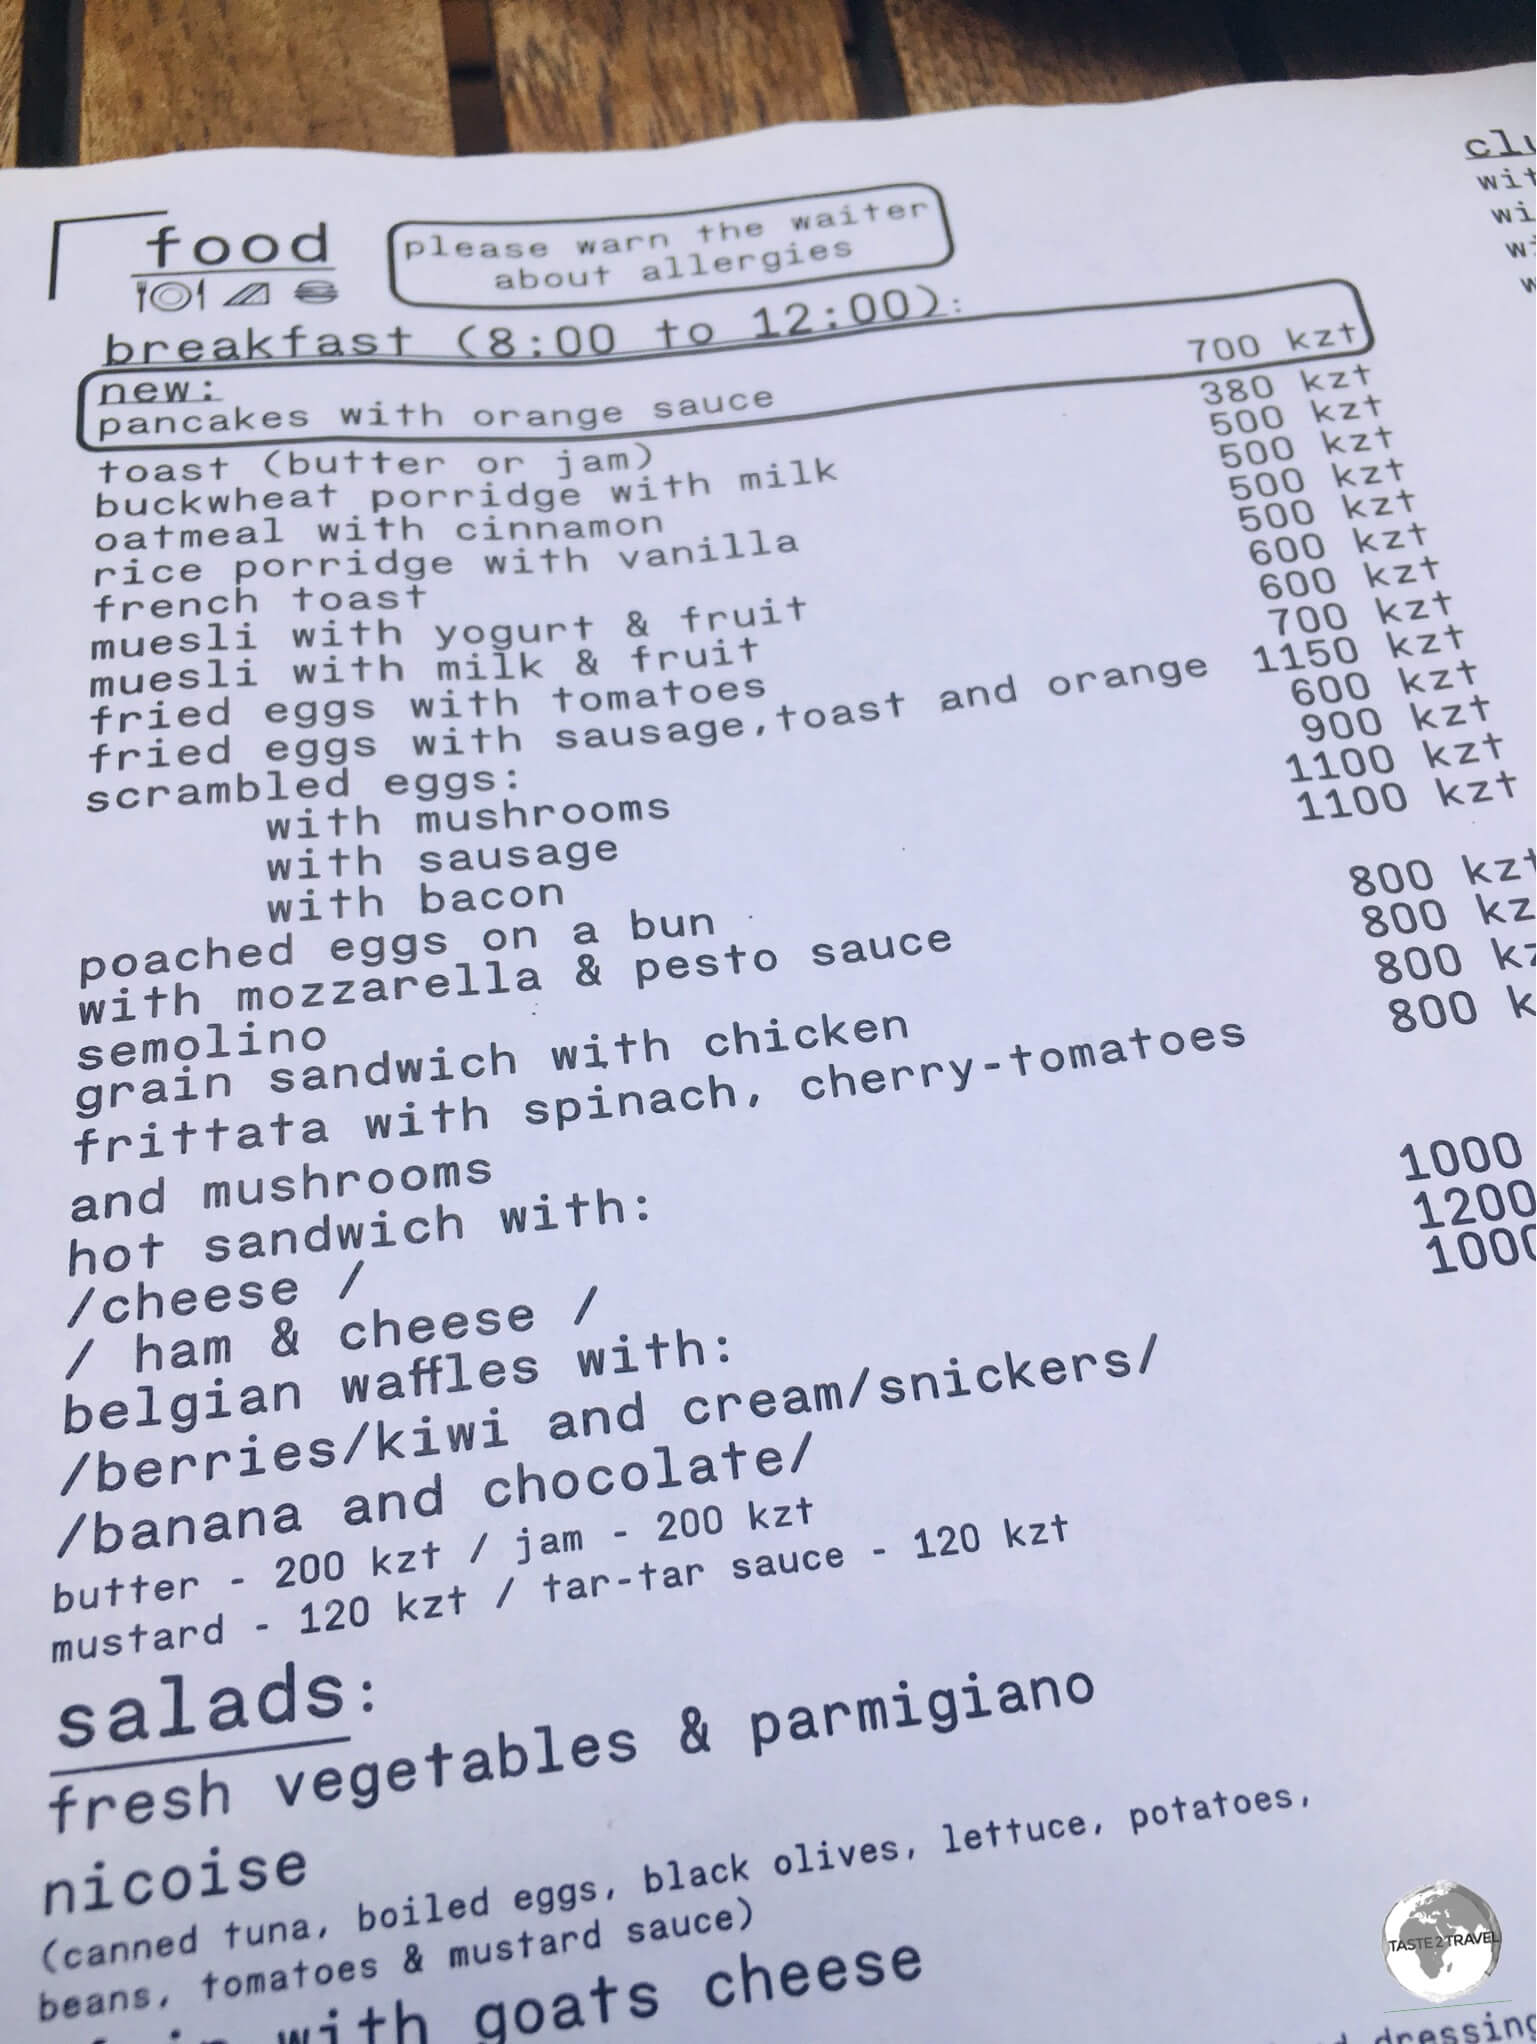 The breakfast menu at Nedelka Cafe in Almaty provides an example of typical restaurant prices. 